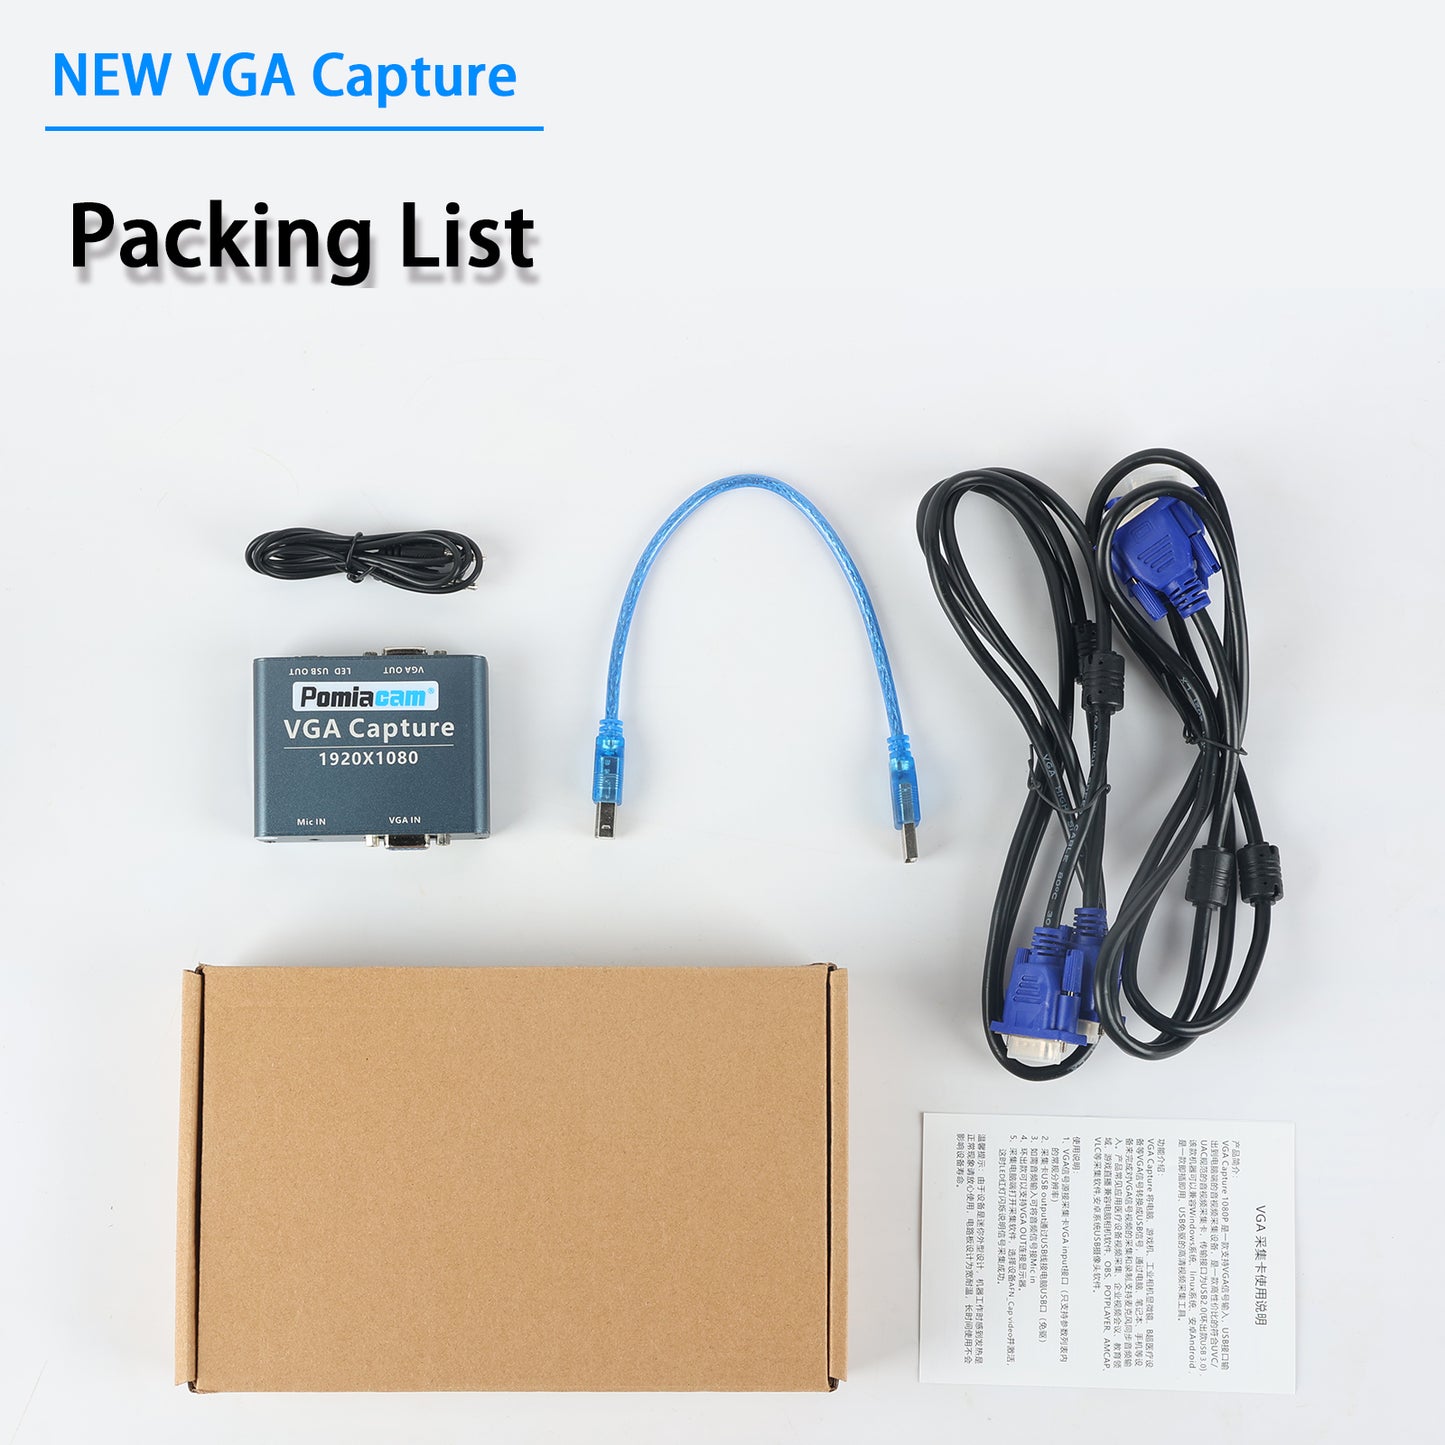 VGA To USB Capture 1080P Audio and Video Capture with Video Capture Card Support UVC/UAC Standard --VGA LOOP Output